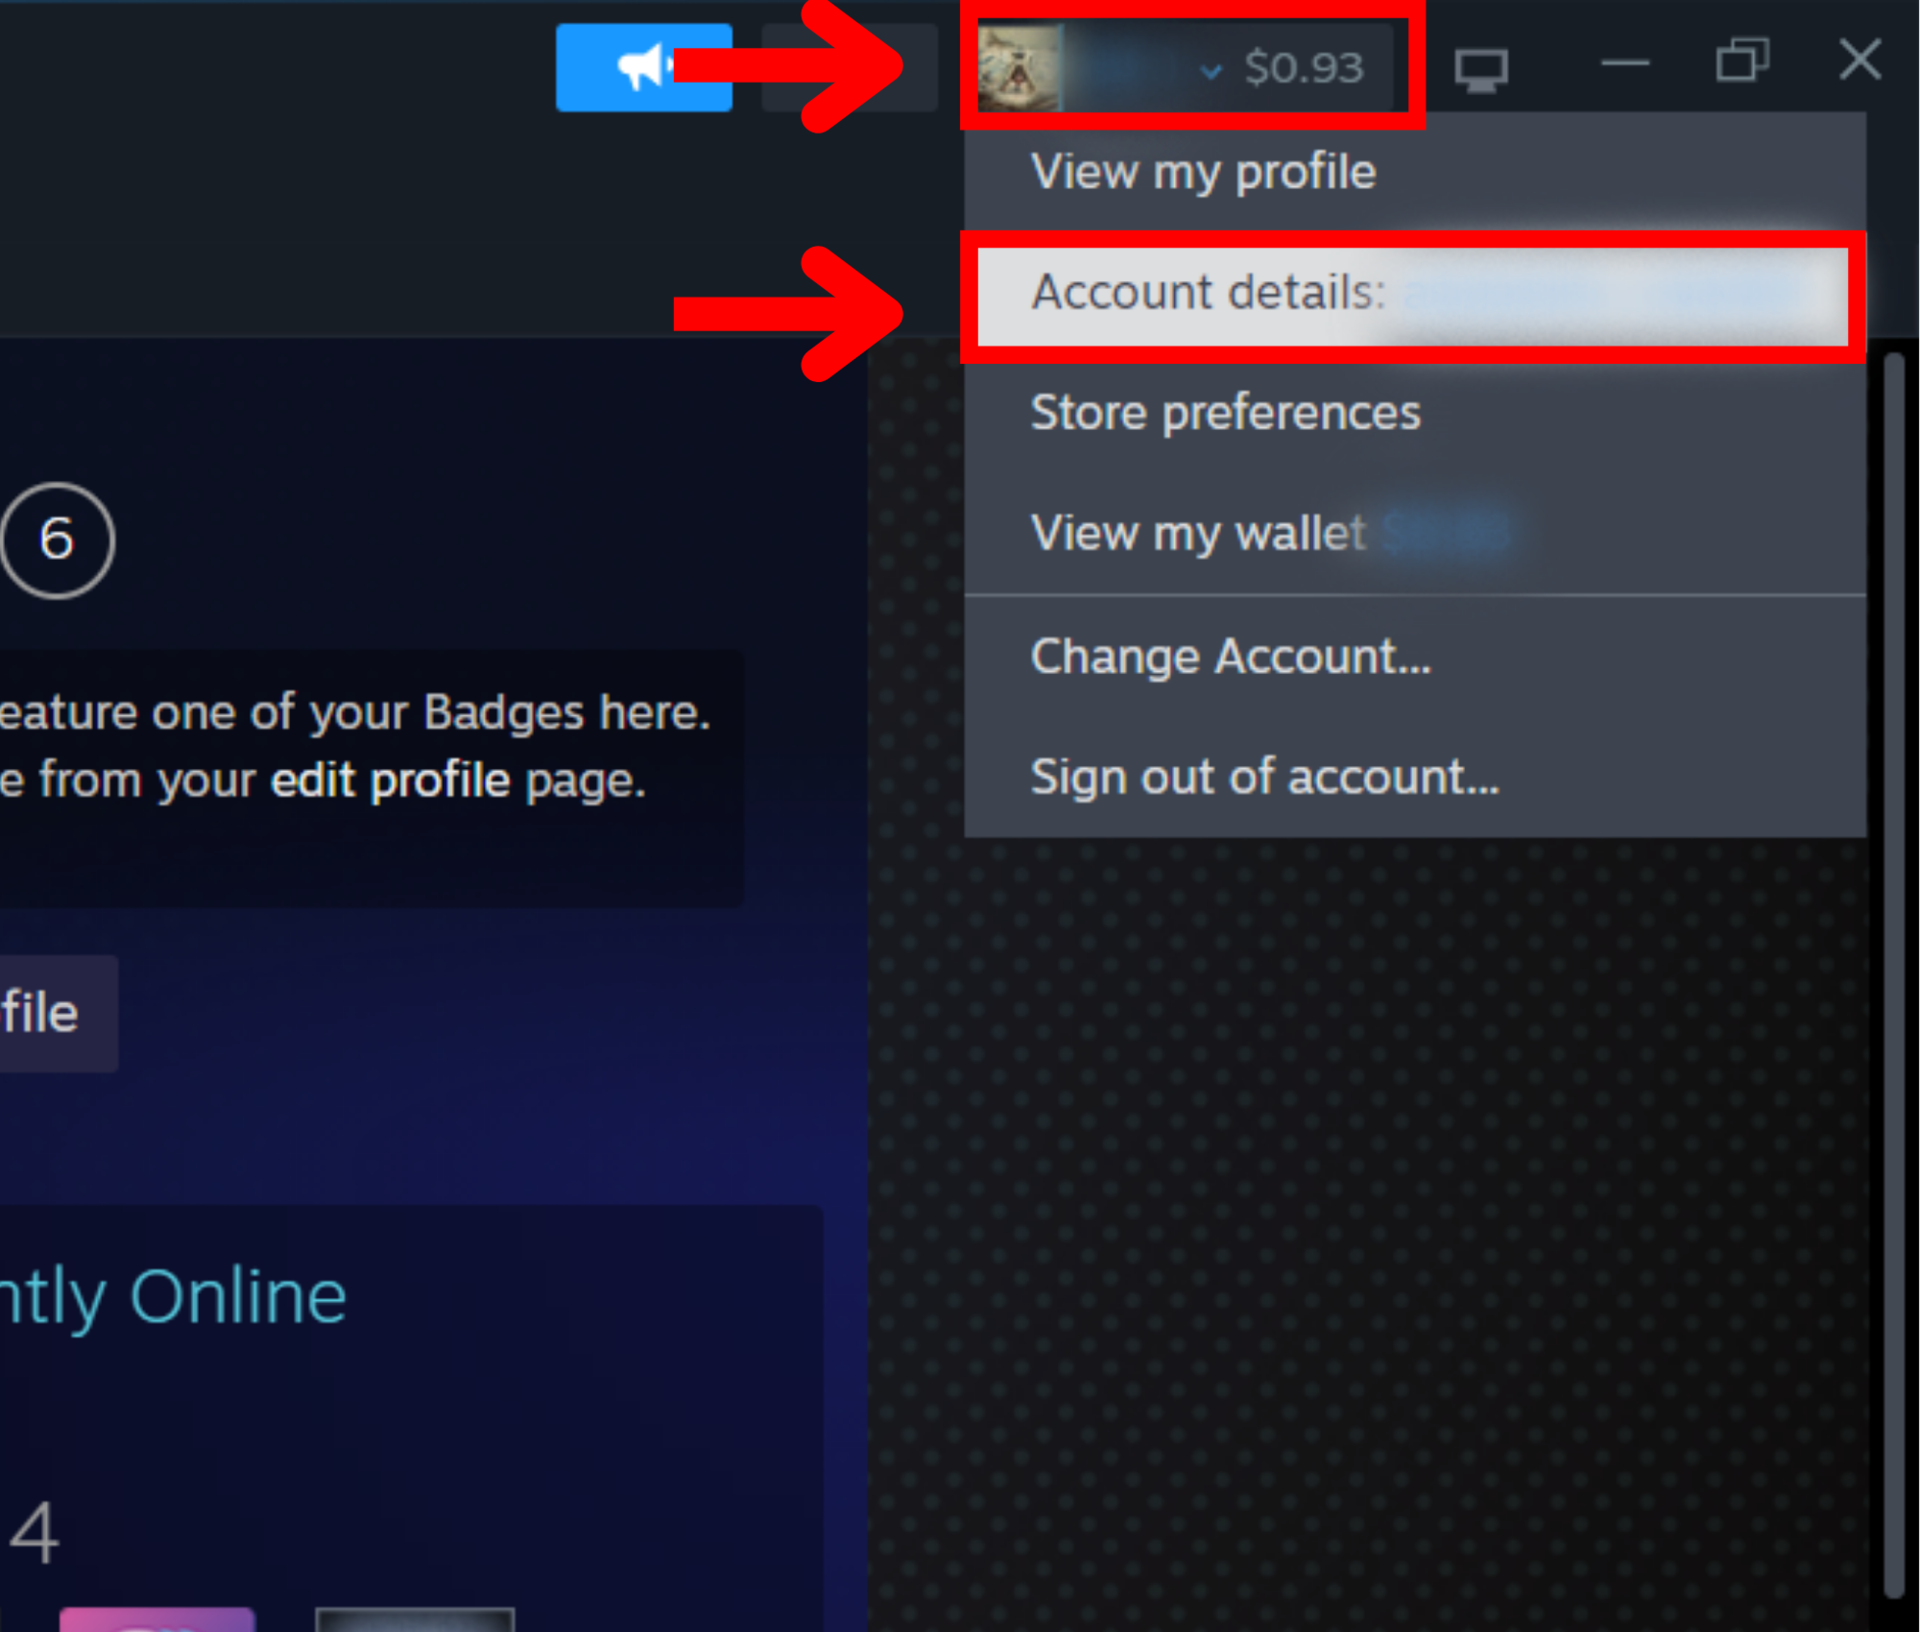 How to get your Steam Profile URL or Steam Username